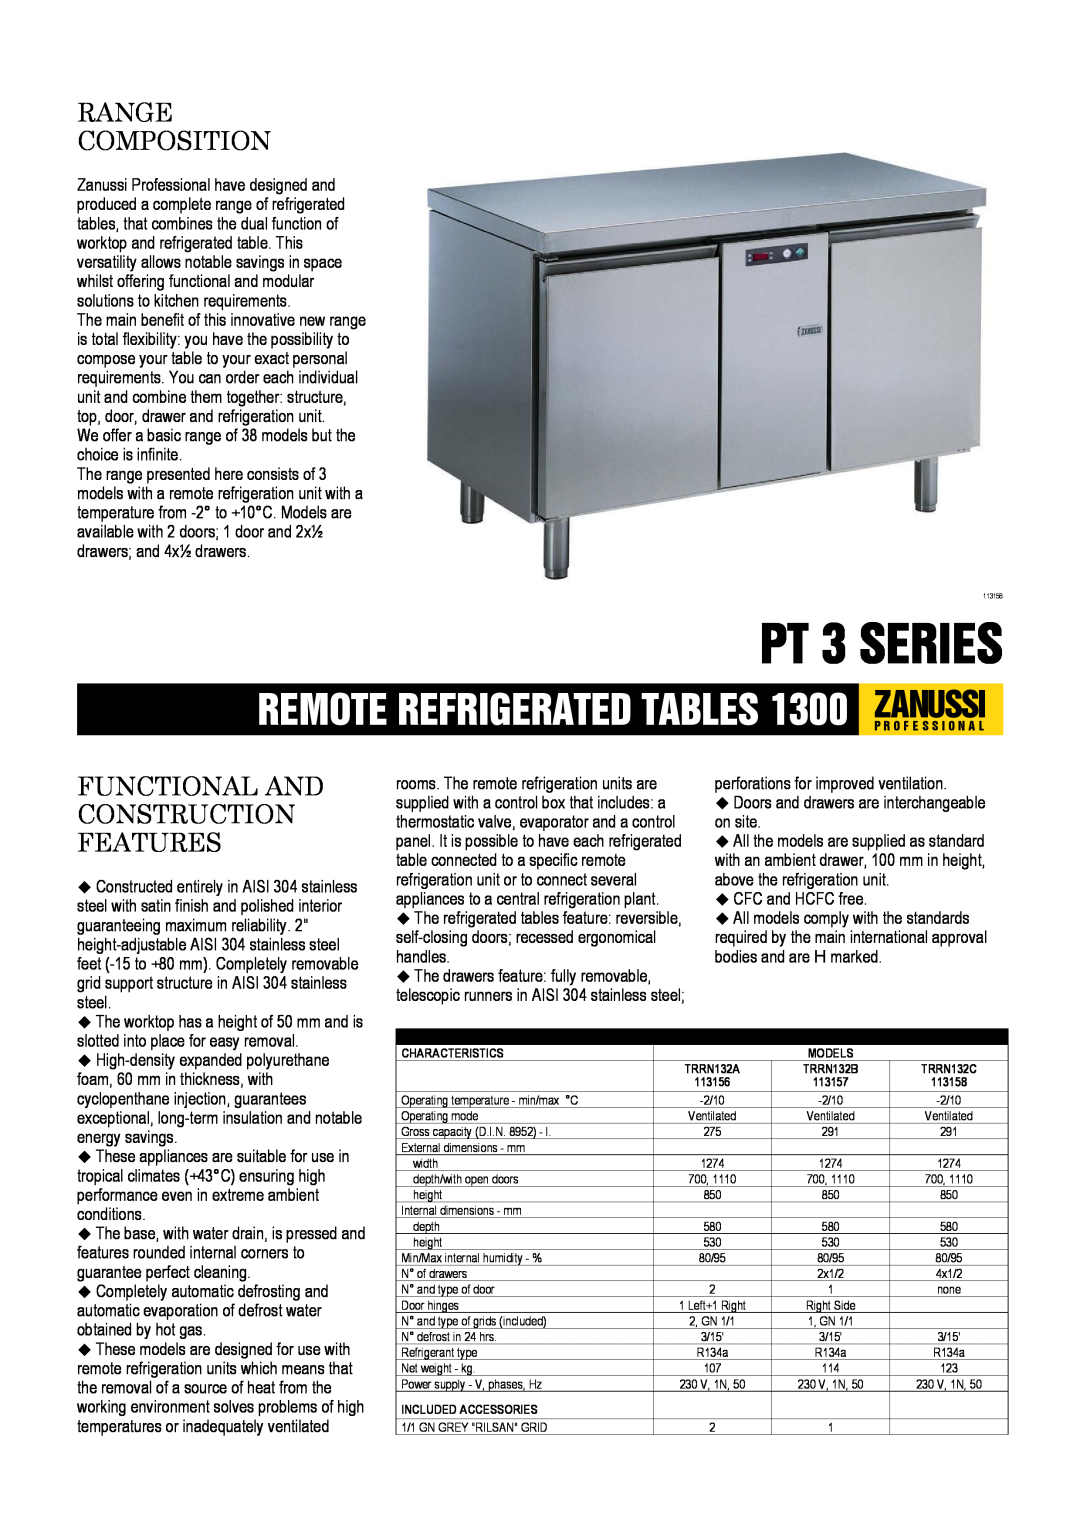 Zanussi 113156, 113157, 113158, TRRN132C dimensions PT 3 SERIES, Range Composition, Functional And Construction Features 